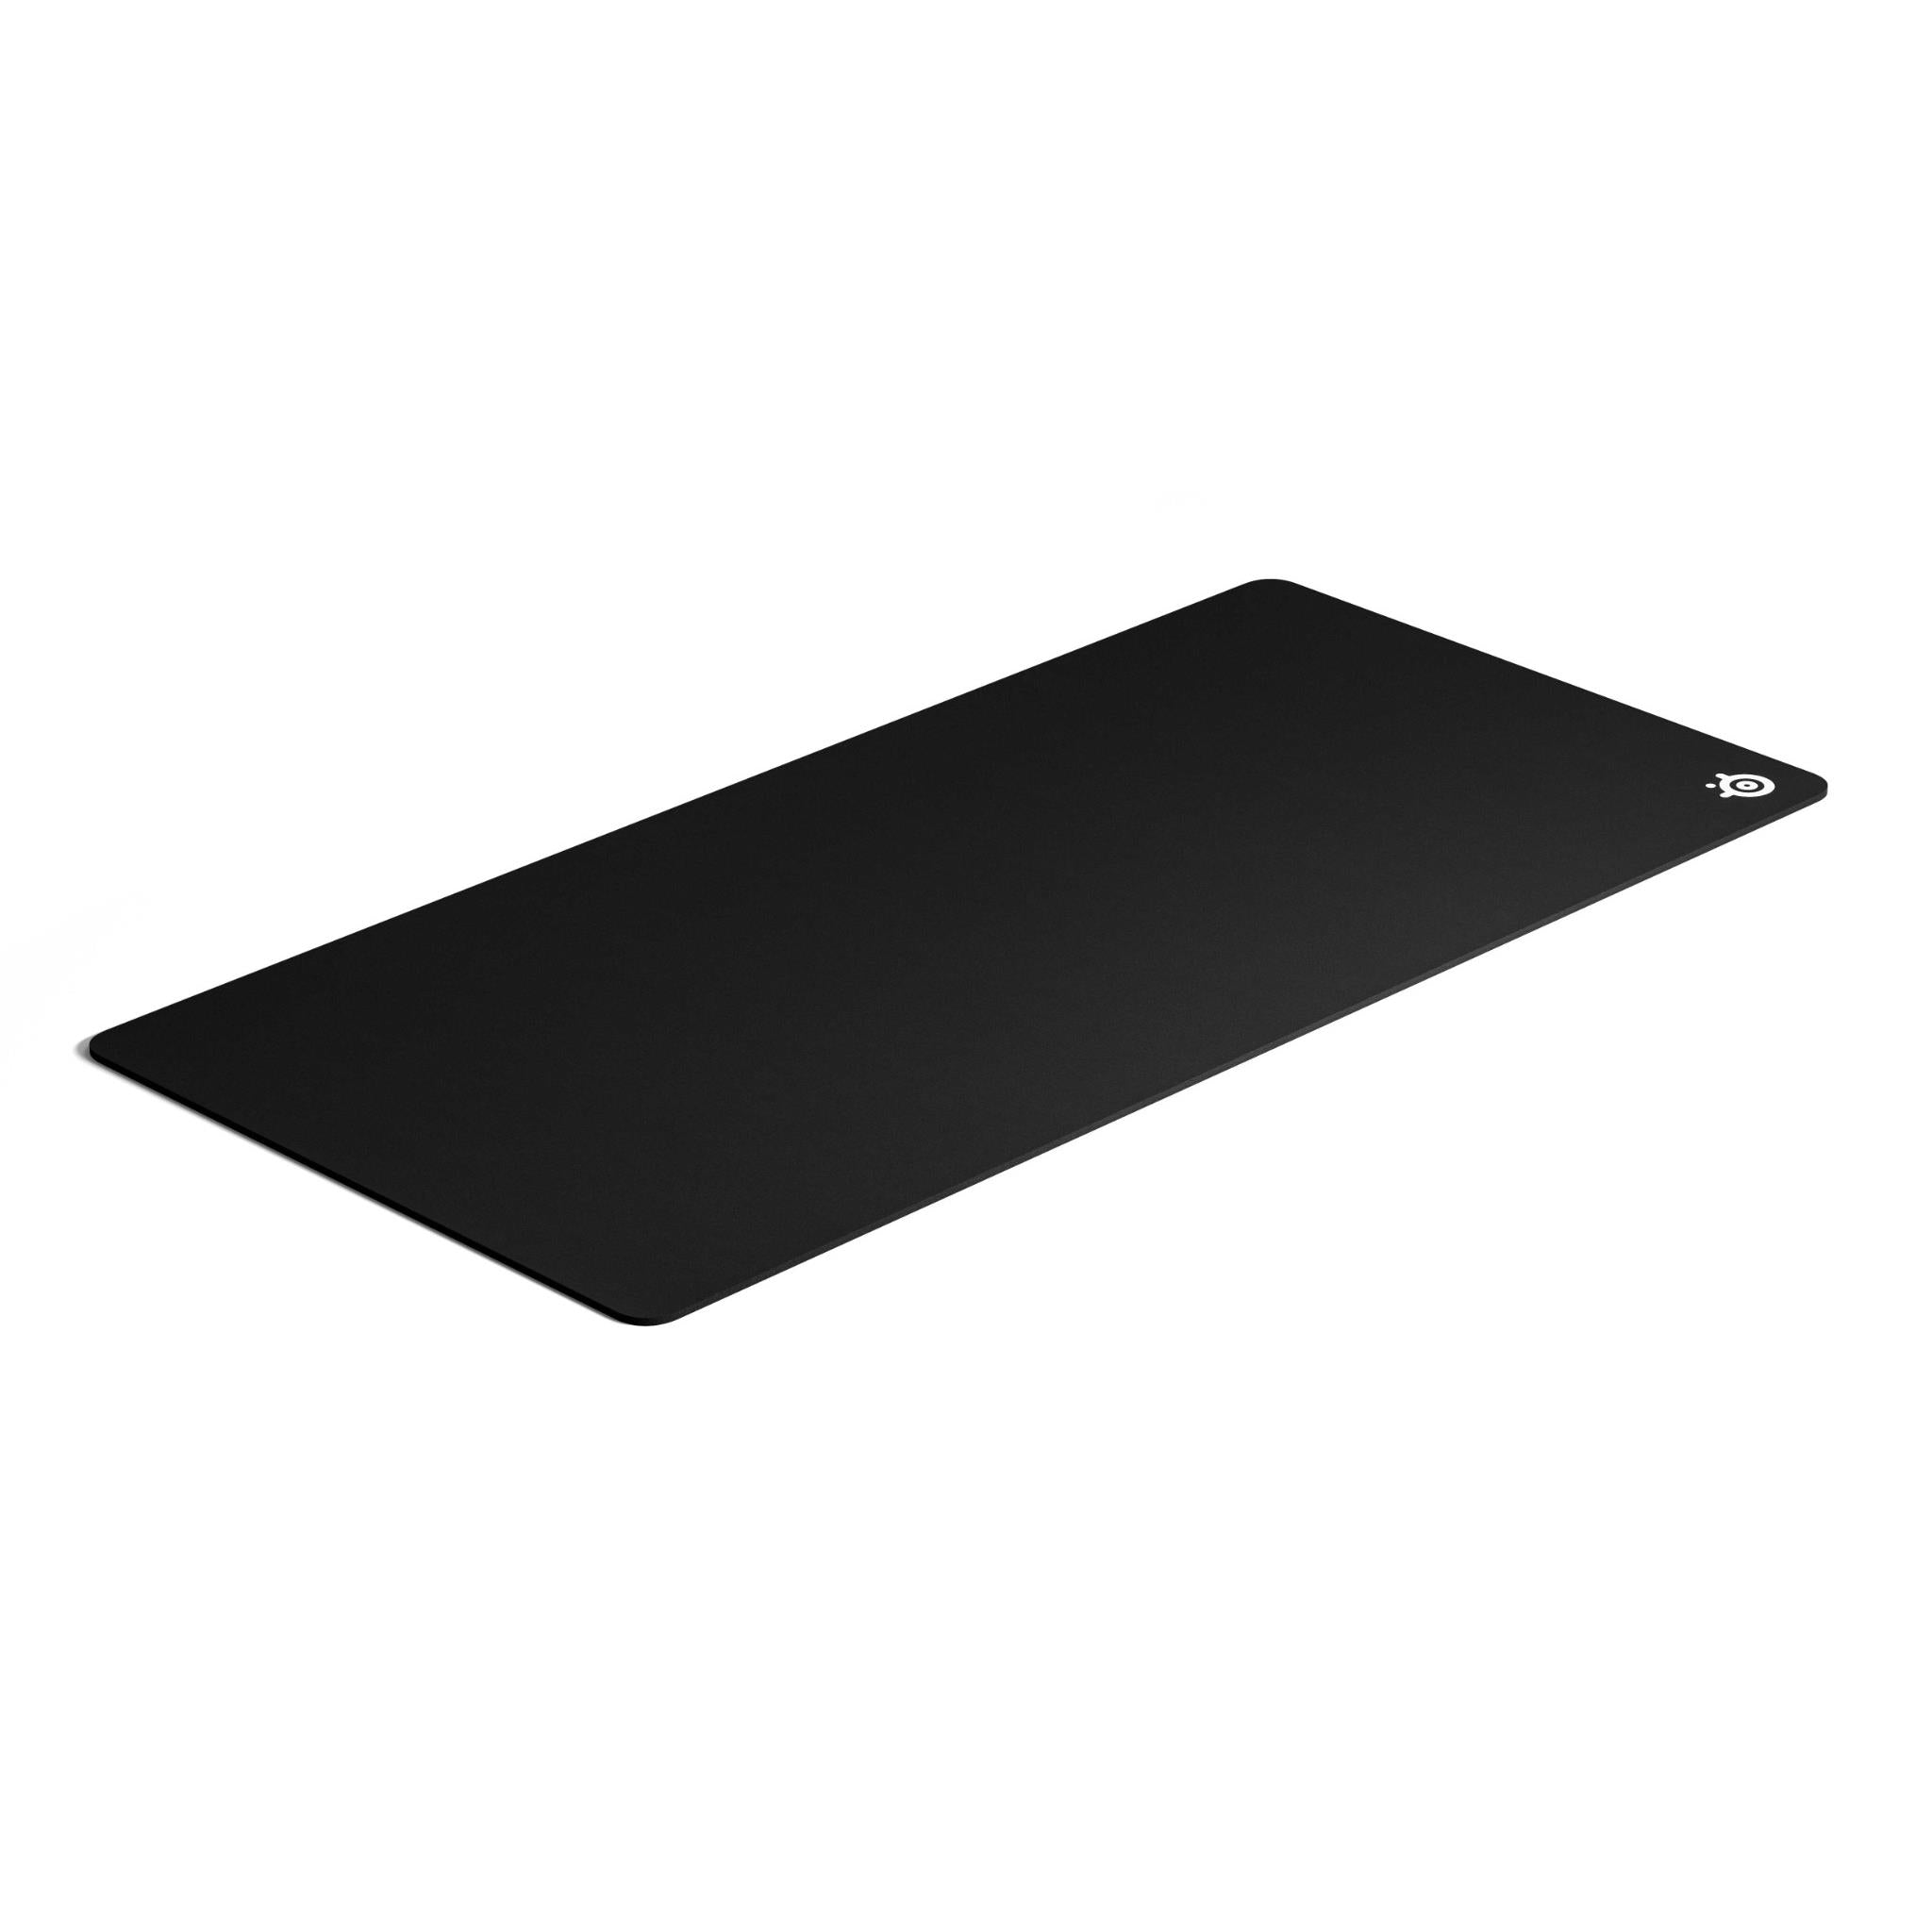 steelseries qck 3x-large gaming mouse pad